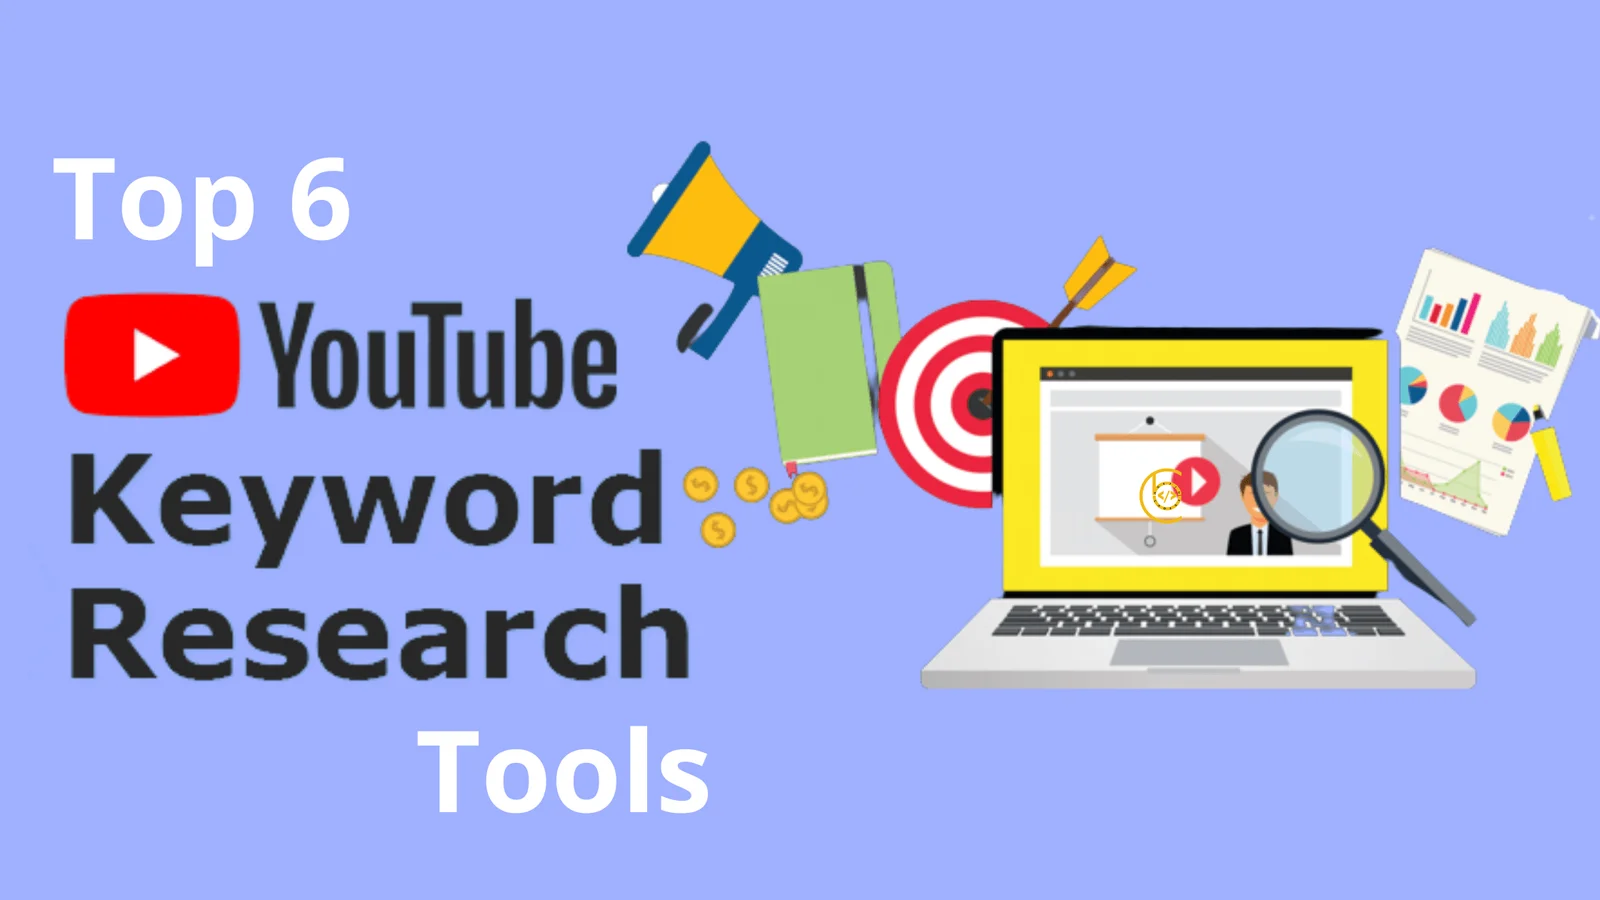 Top 6 YouTube Keyword Research Tools Use in 2022